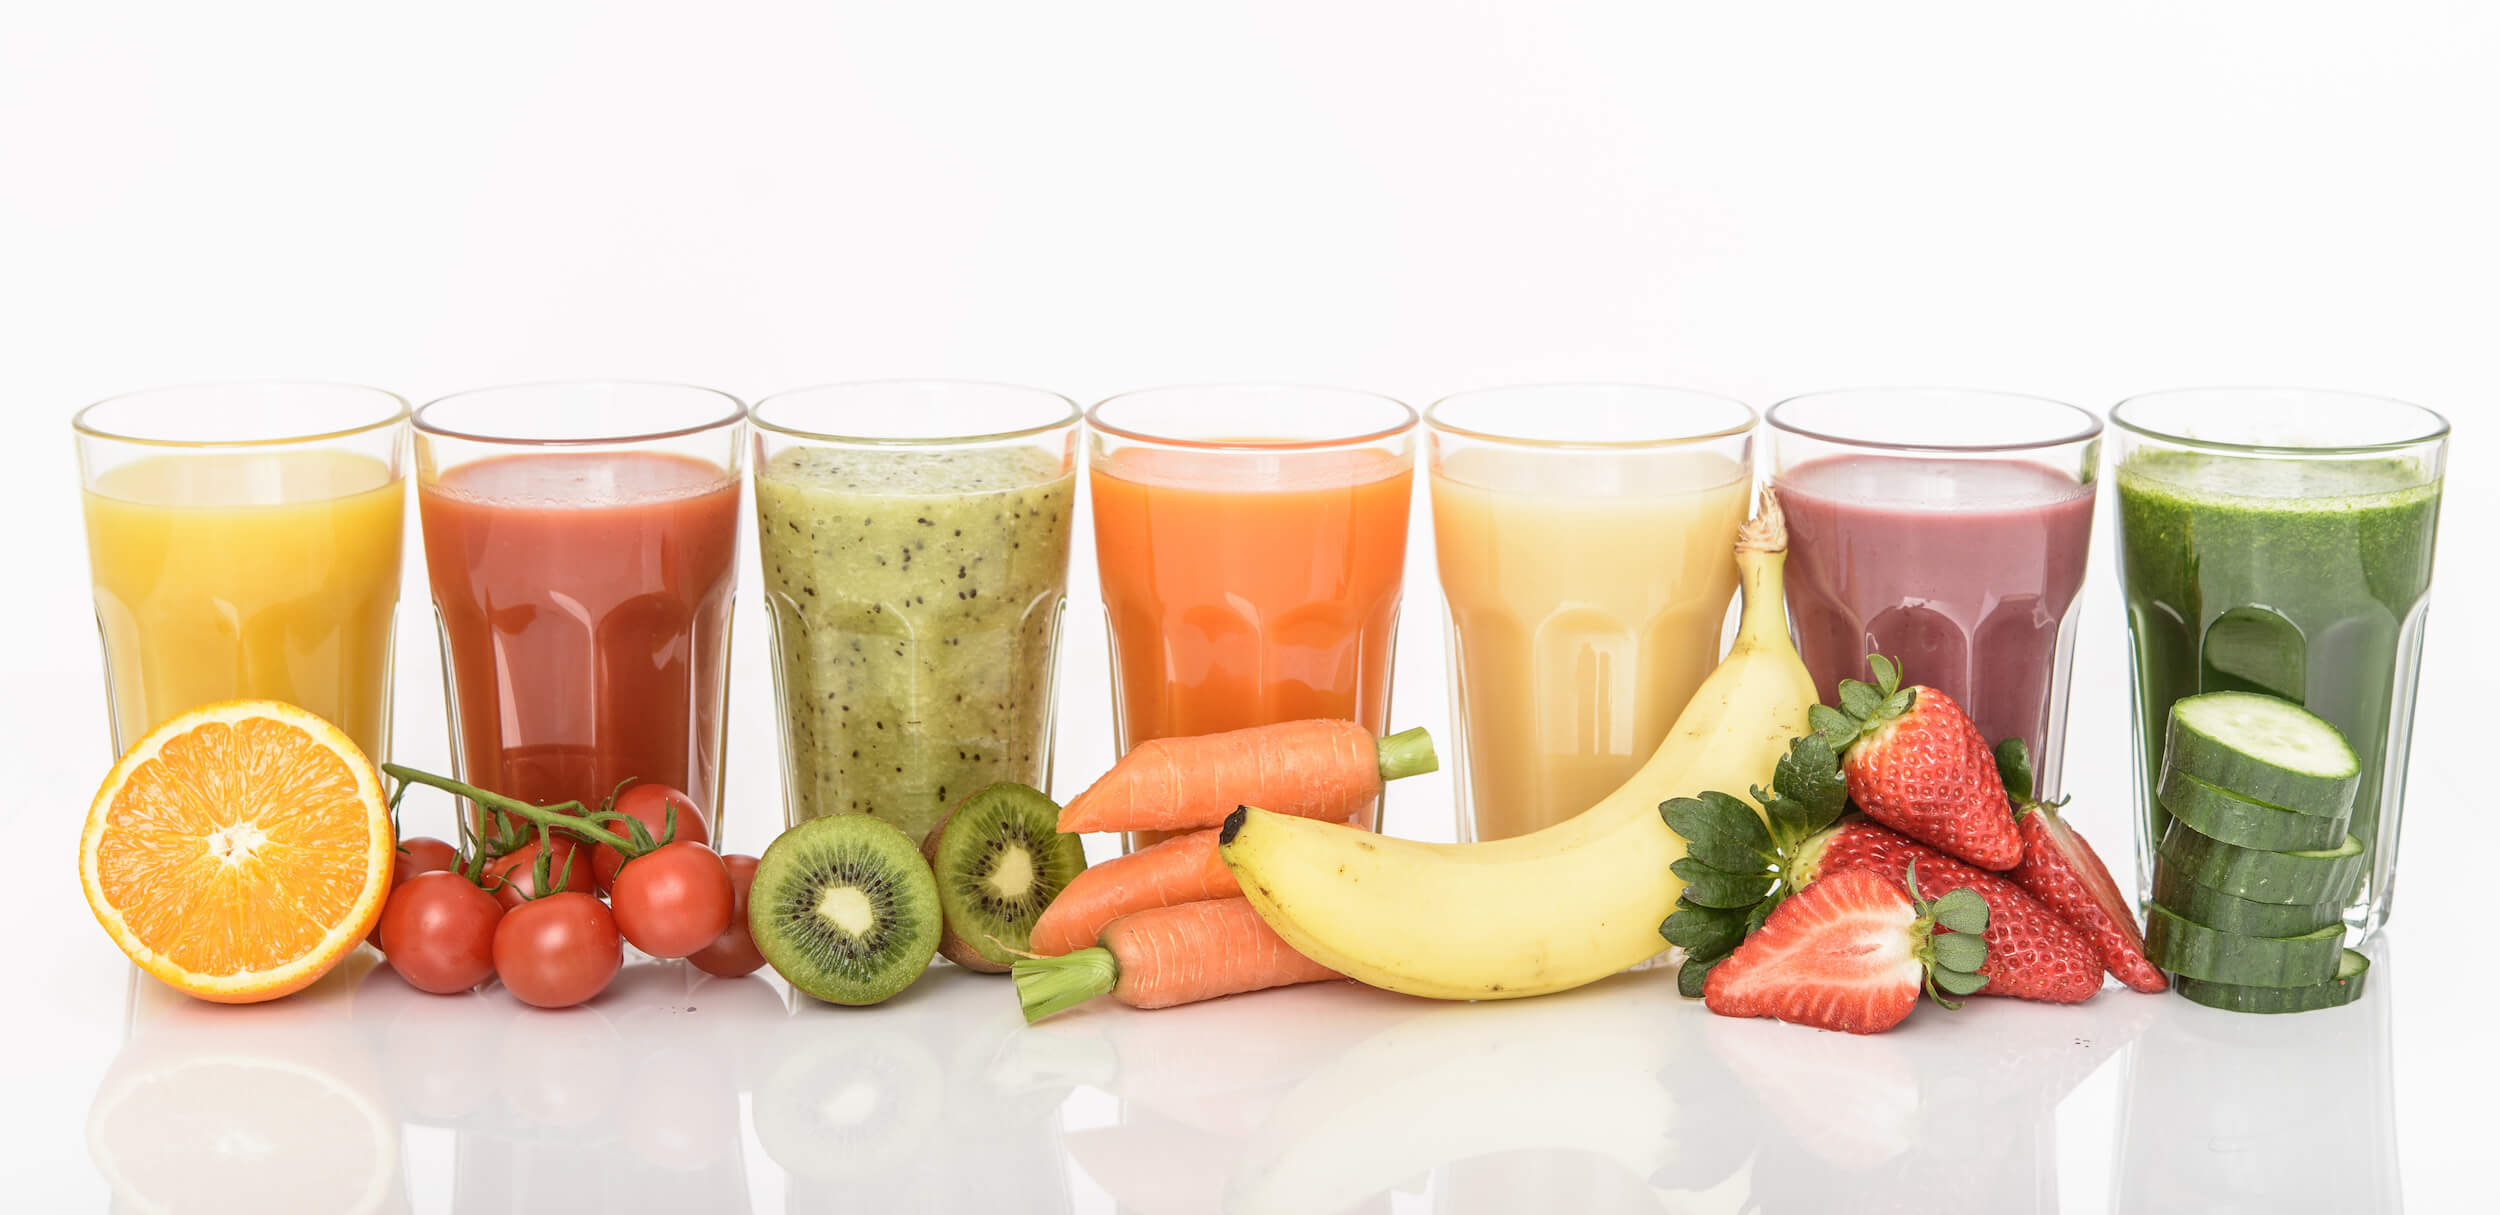 Aligned glasses filled with various types of juices, with the main ingredient in front of each glass